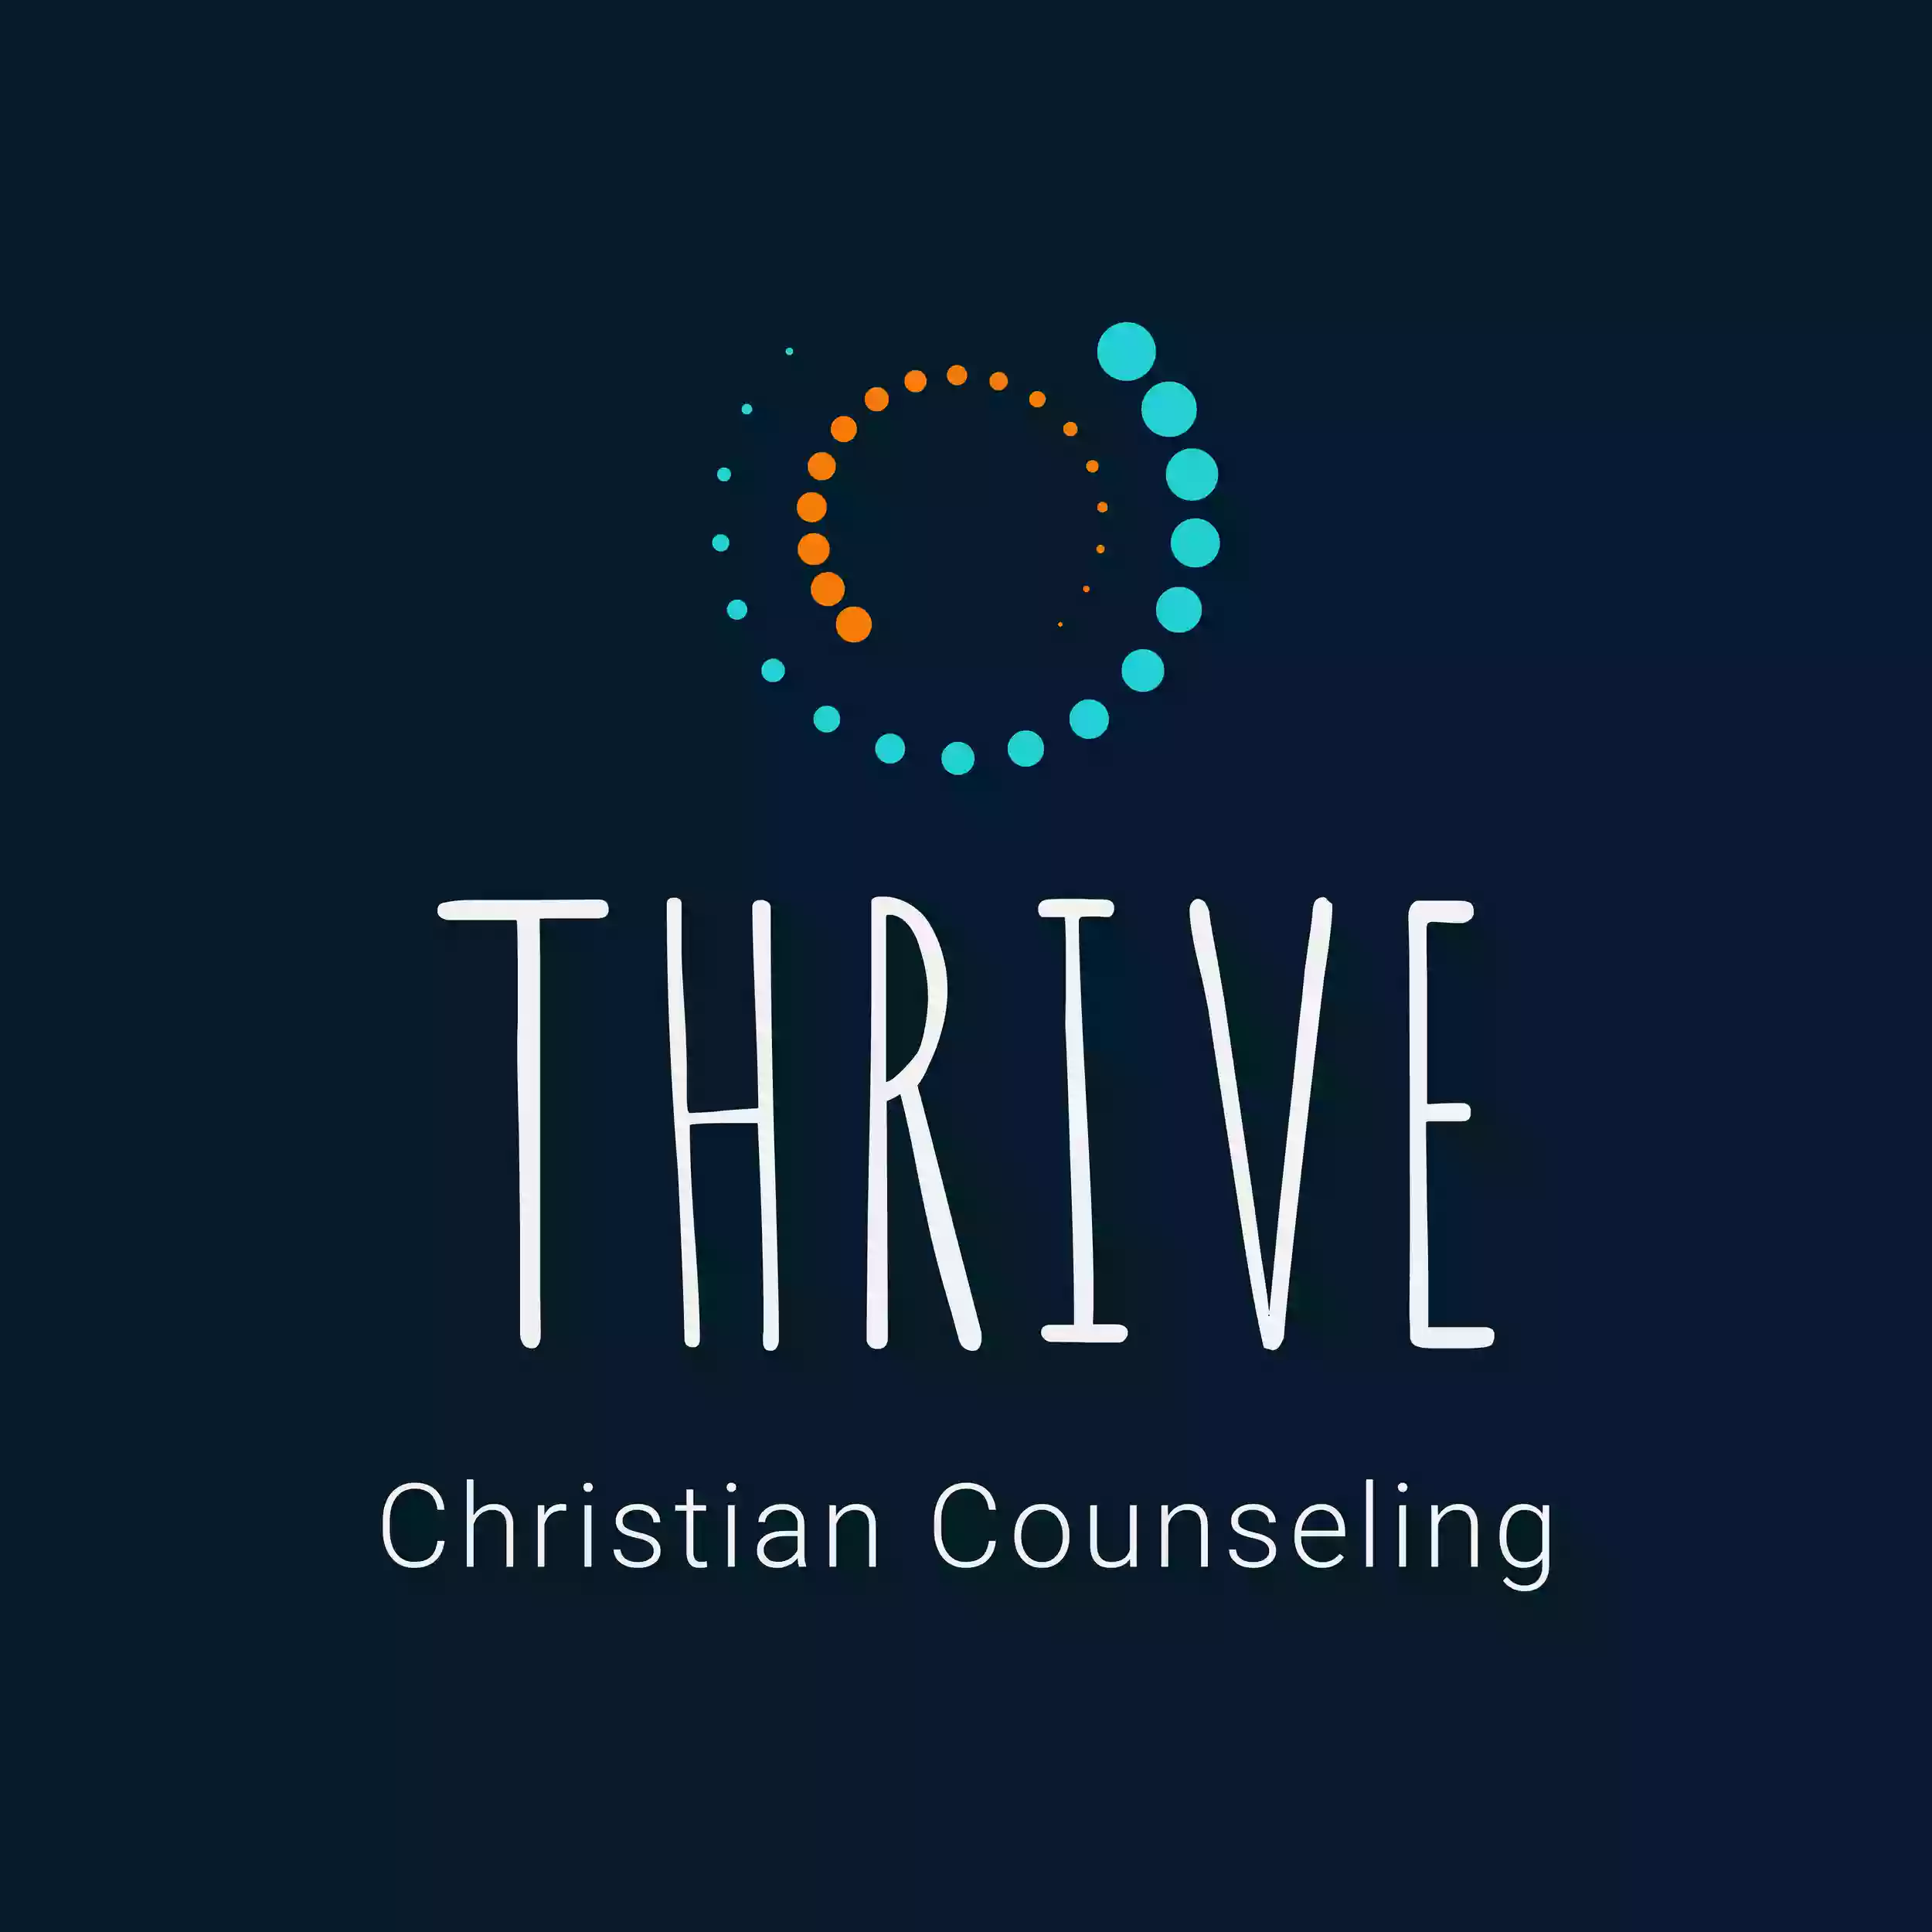 Thrive Christian Counseling